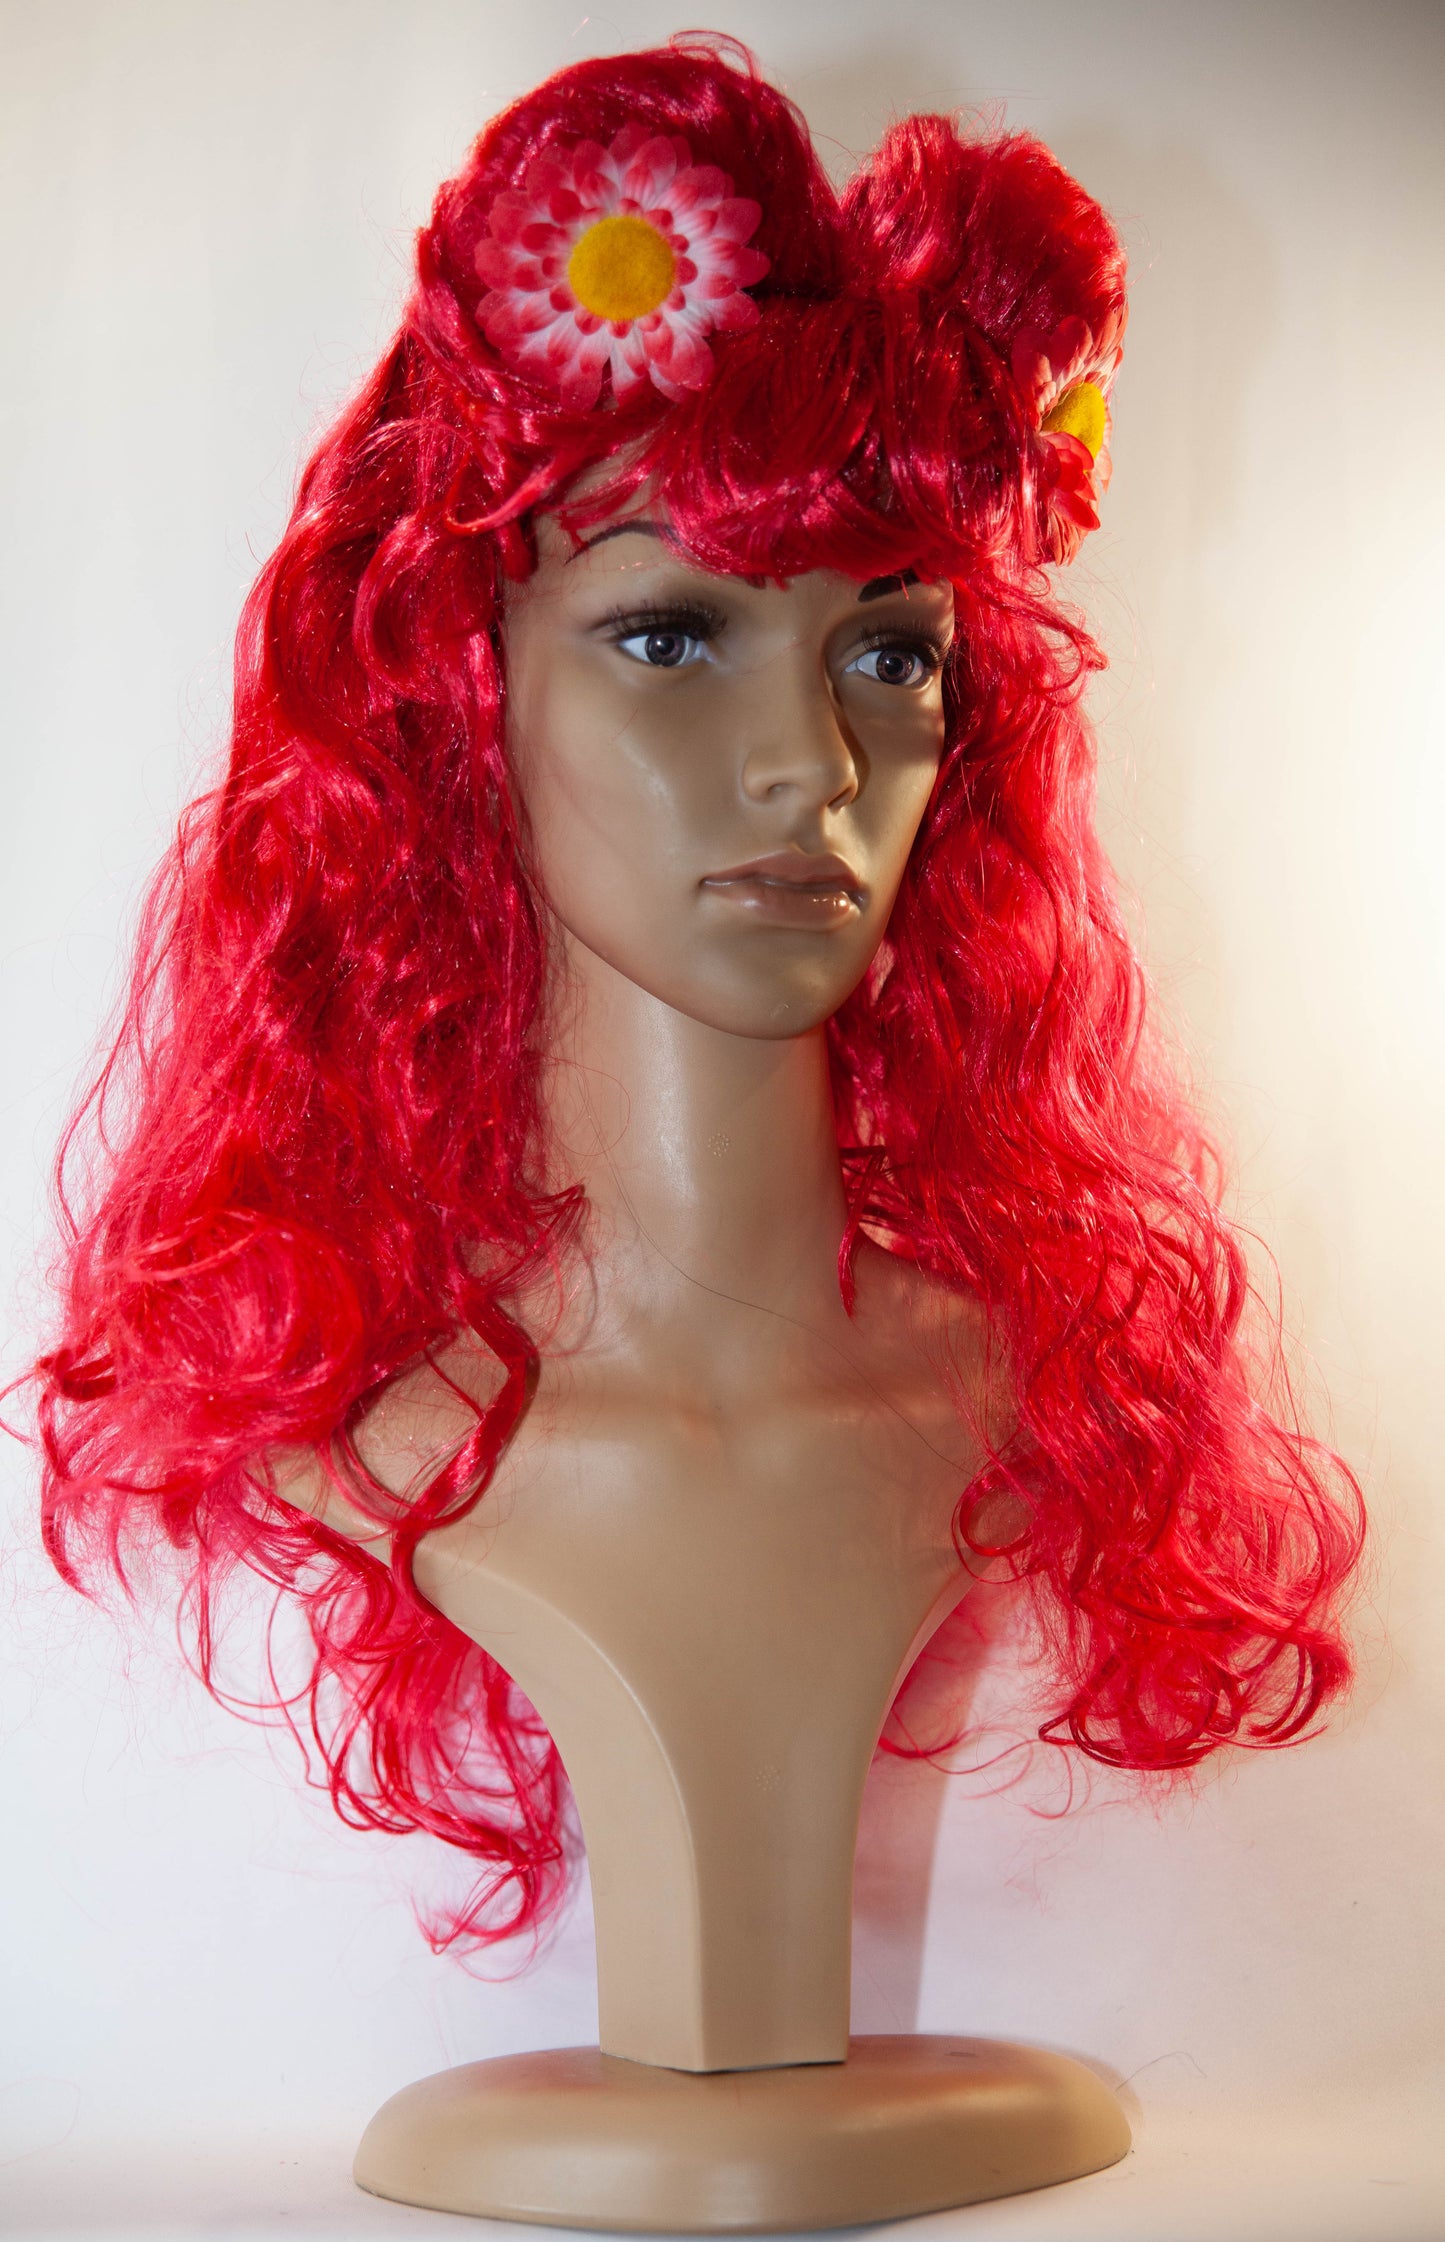 Red wig with flower